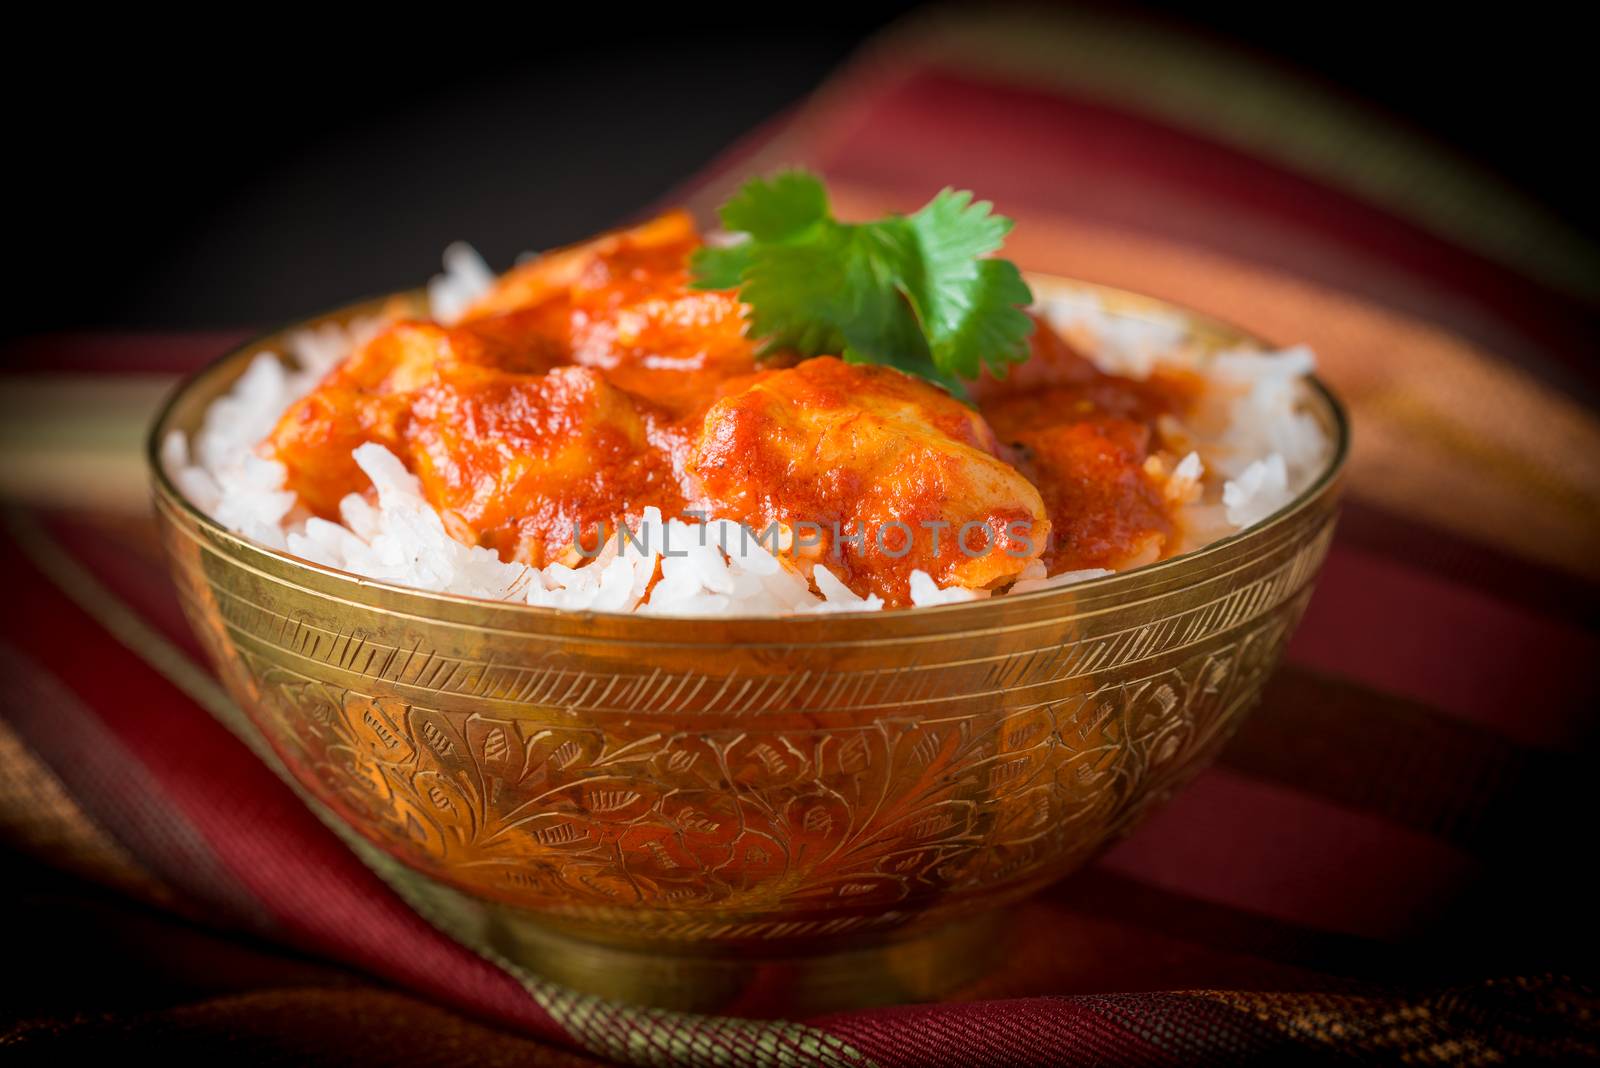 Delicious Indian butter chicken served with basmati rice.